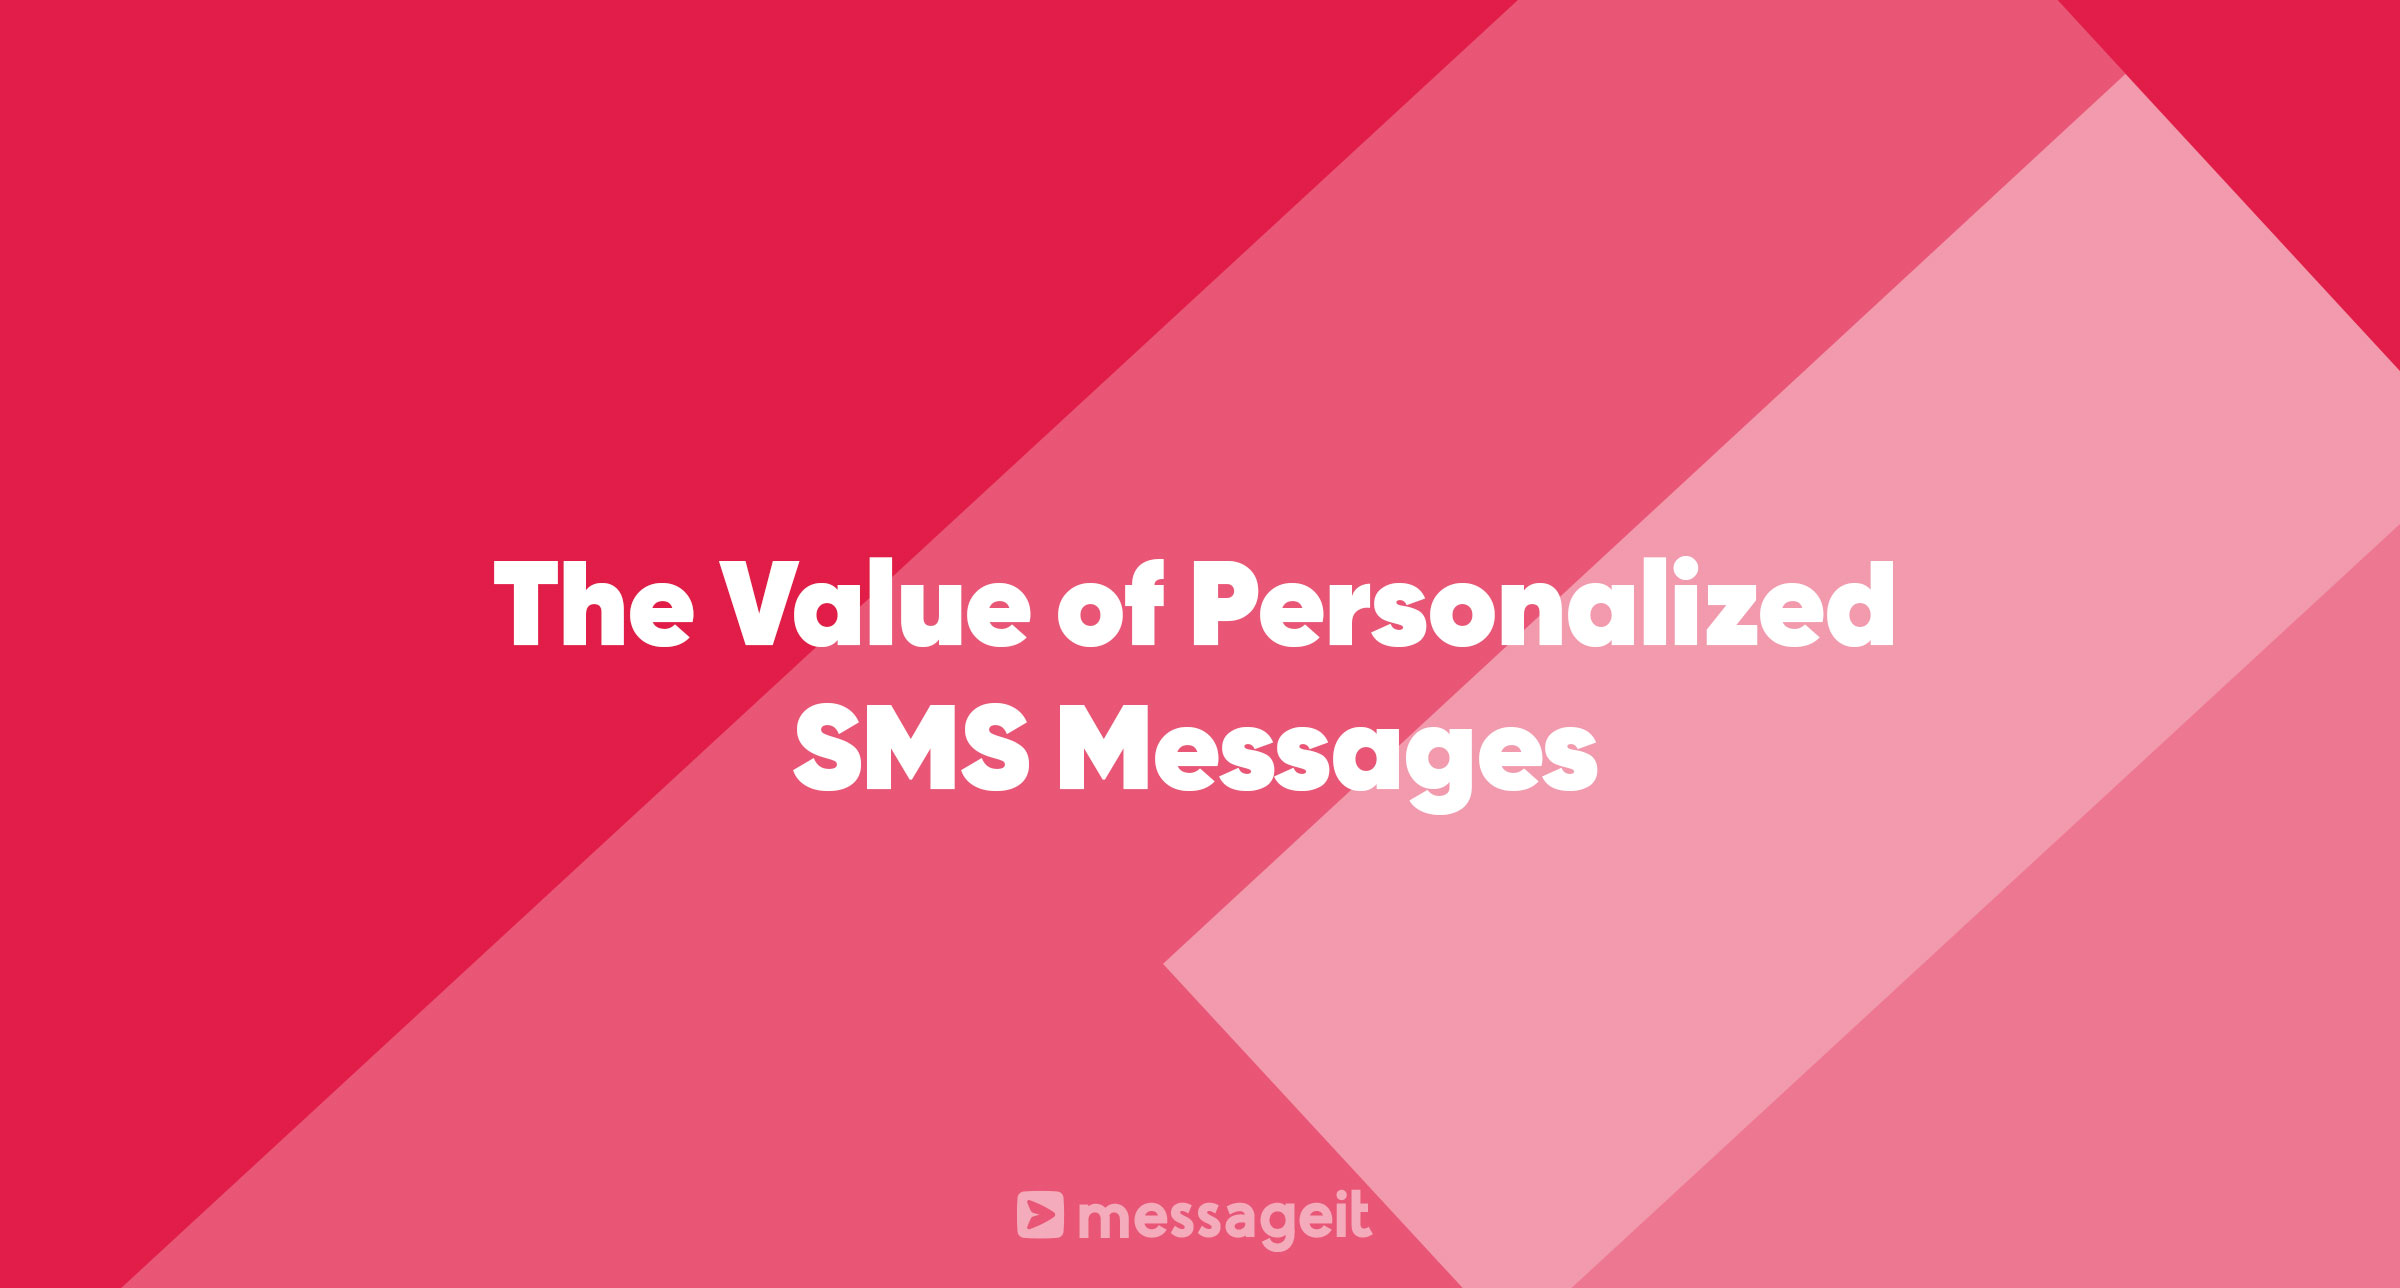 Article | The Value of Personalized SMS Messages